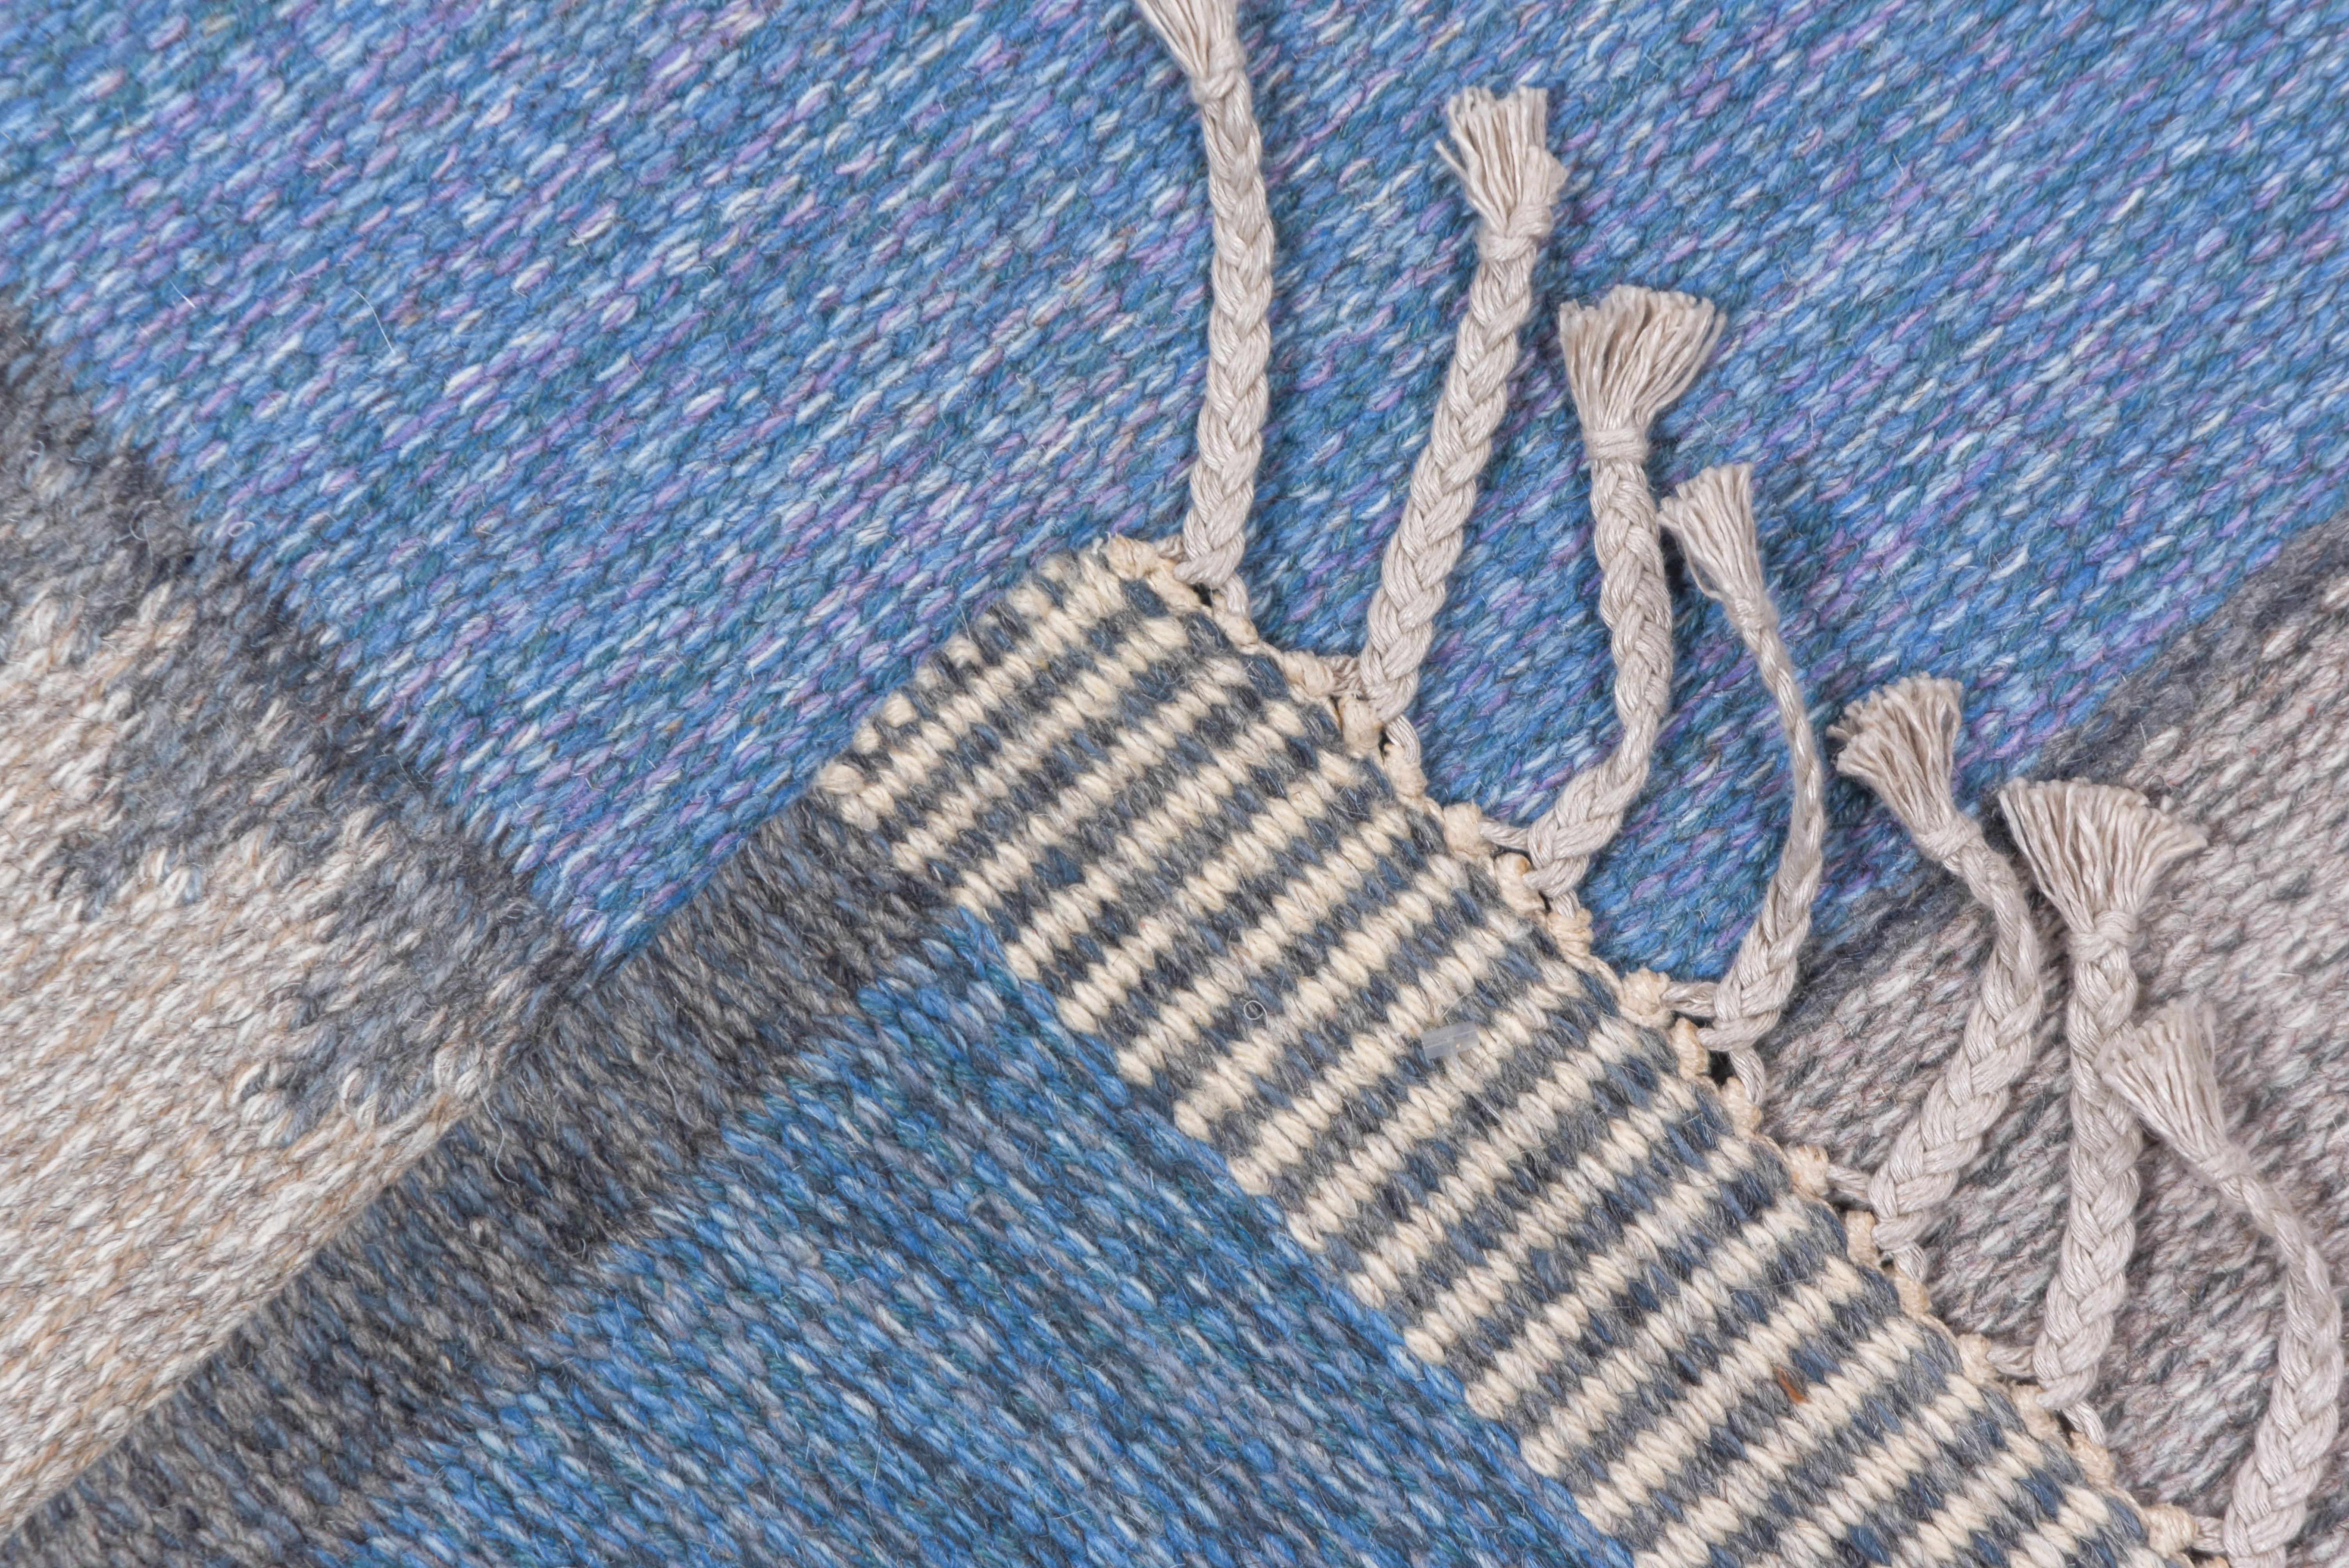 A plain, slightly varied, light blue field is framed by a border of squares in shades of light blue, pale blue, and light grey, with cross details in every second panel. Wool pattern weft, tapestry weave. End finish tassels. A picture frame without